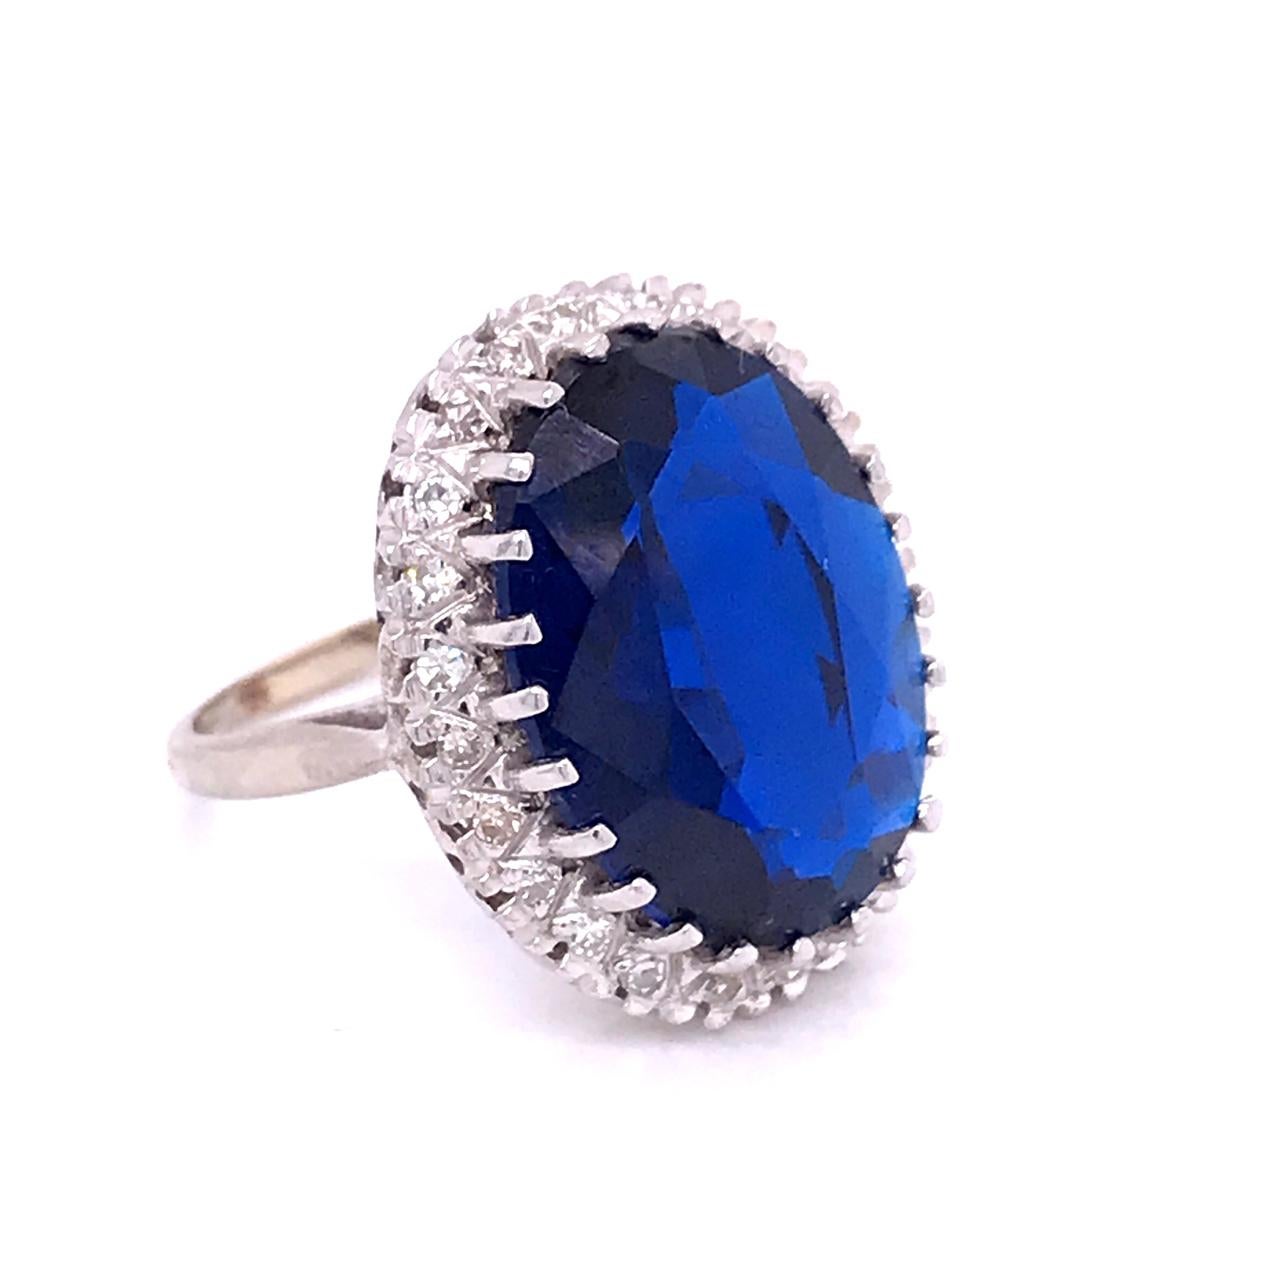 14 Karat White Gold, Diamond, and Large Blue Topaz Cocktail Ring For Sale 6